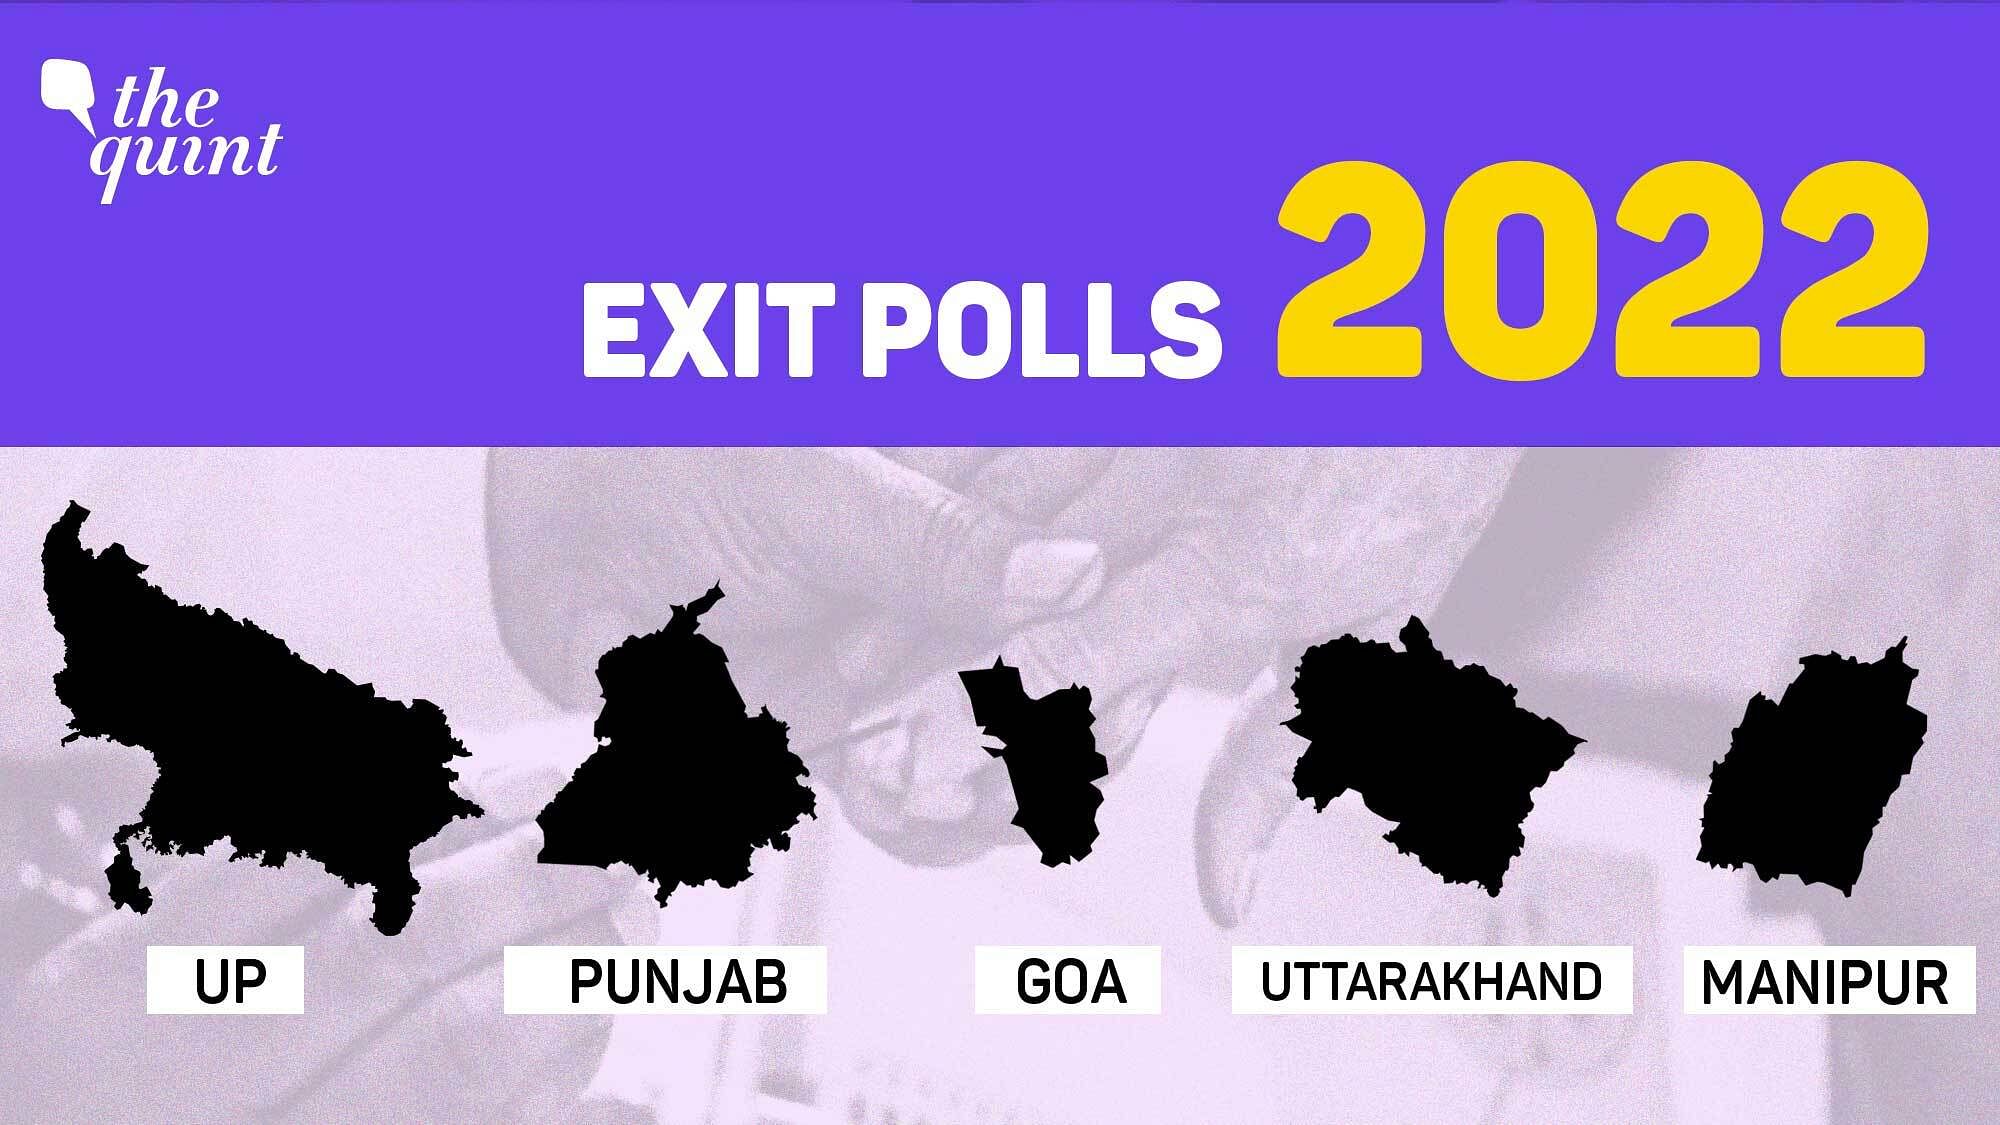 <div class="paragraphs"><p>Let's take a look at how close the exit polls came to the actual results. Here is what the exit polls had predicted.</p></div>